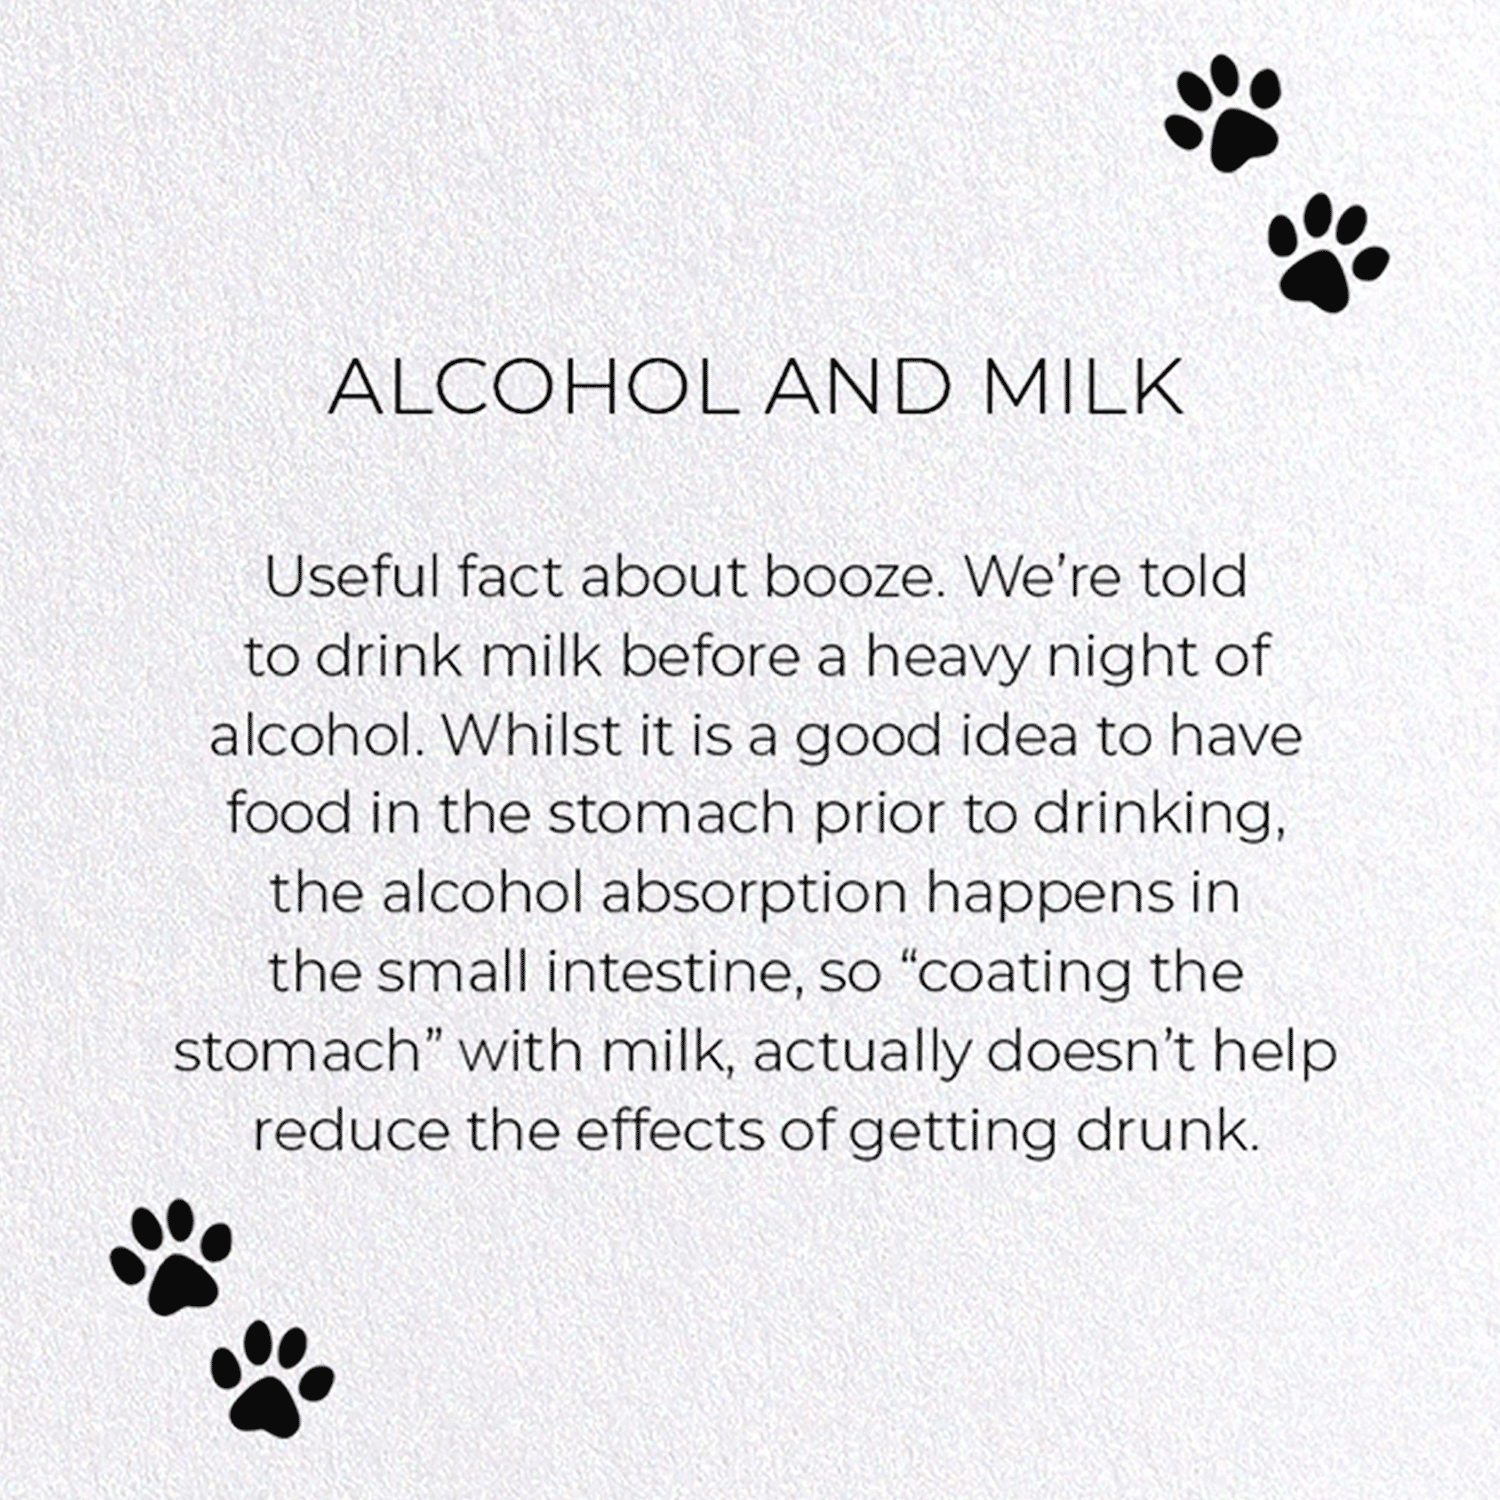 ALCOHOL AND MILK